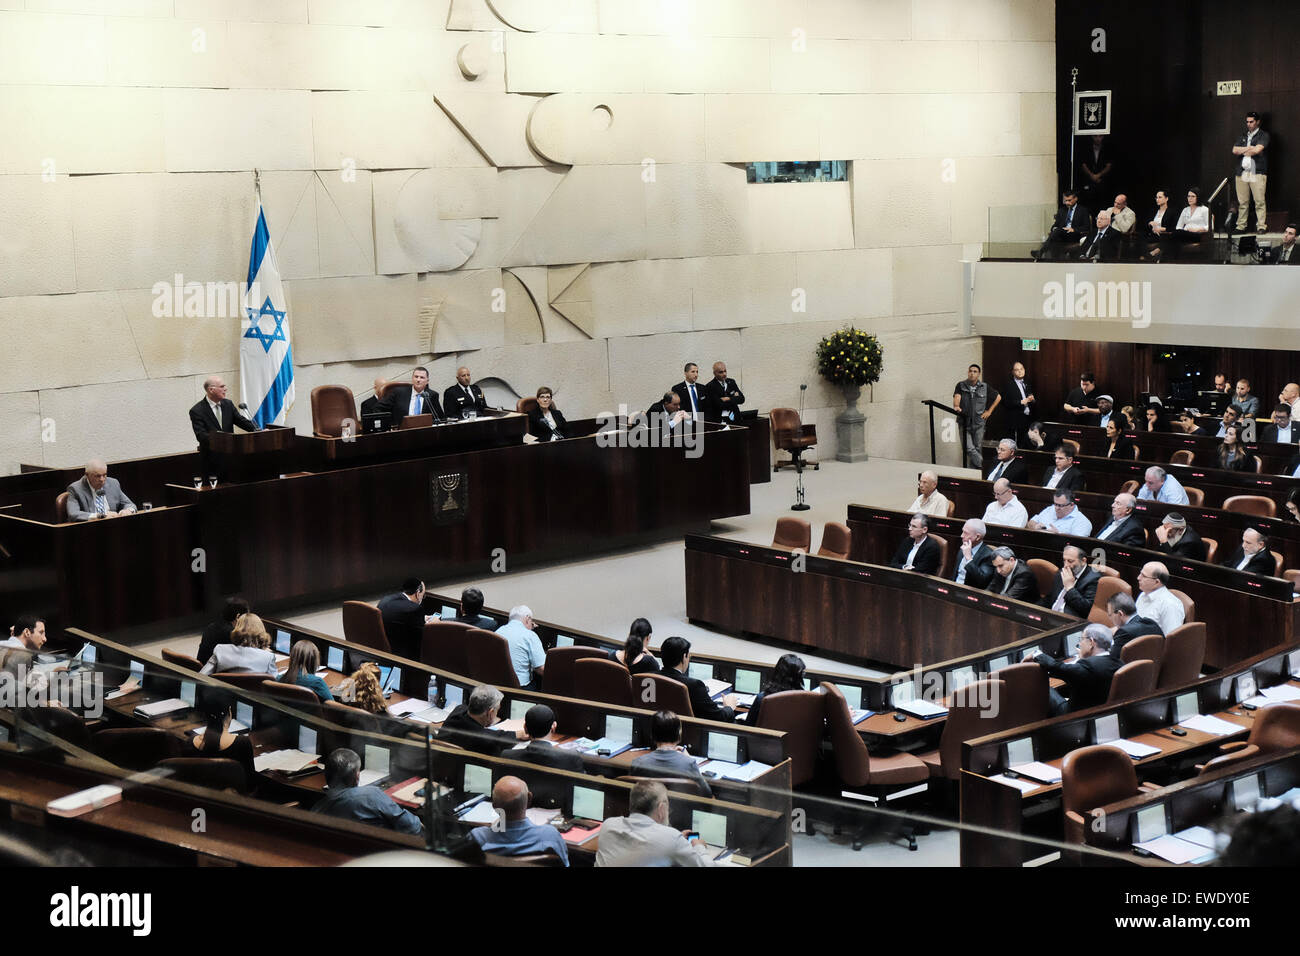 Jerusalem, Israel. 24th June, 2015. German Bundestag President Dr. NORBERT LAMMERT addresses the Knesset plenum.  Lammert visited the Knesset, the Israeli Parliament, to mark 50 years since the establishment of diplomatic relations between Israel and Germany. Credit:  Nir Alon/Alamy Live News Stock Photo